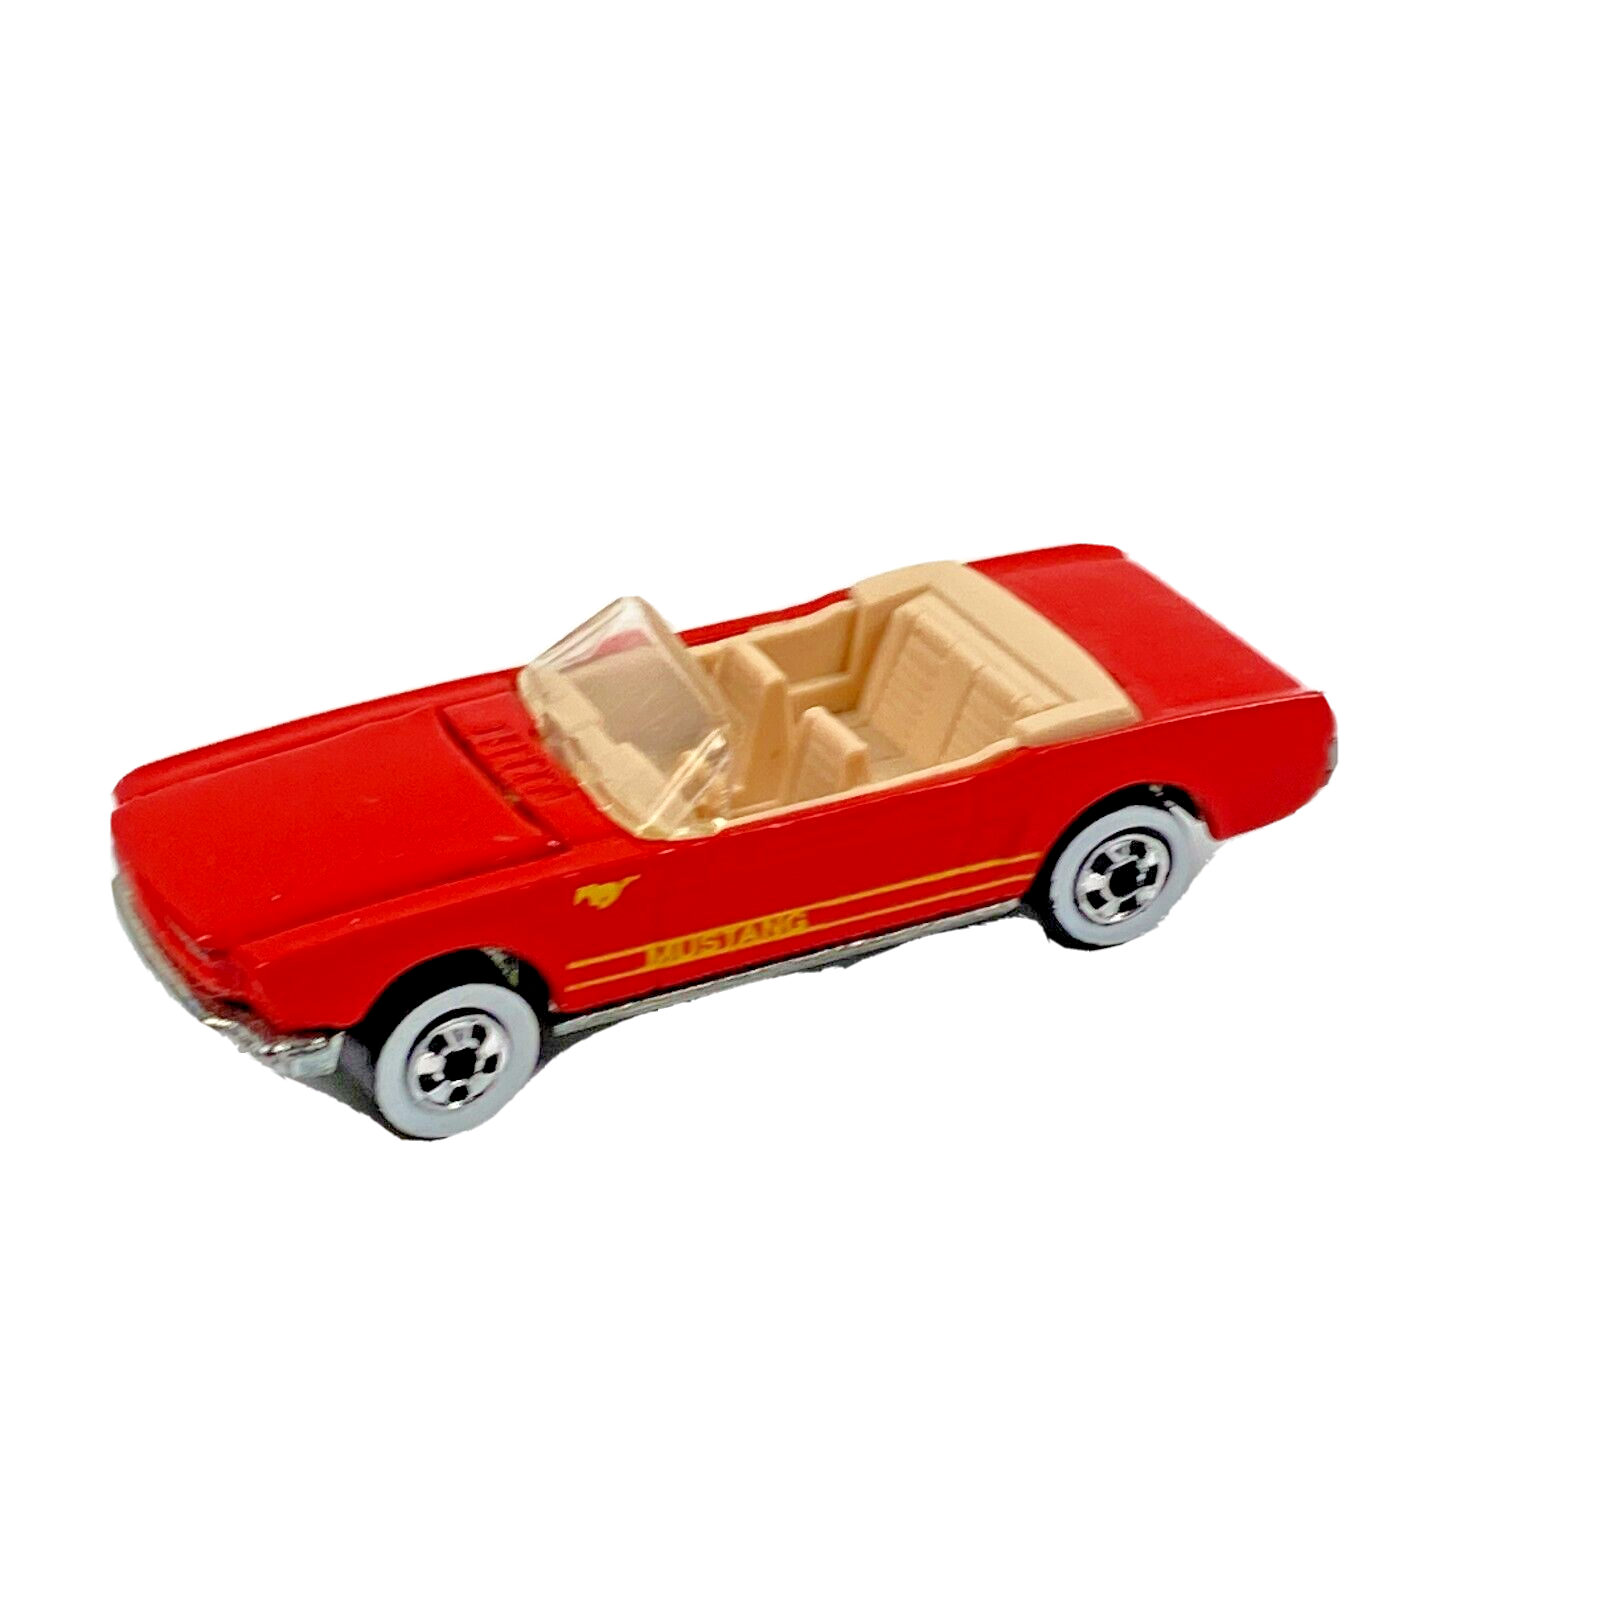 Primary image for Hot Wheels Mattel 65 Ford Mustang Convertible 1983 Red Diecast Toy Car